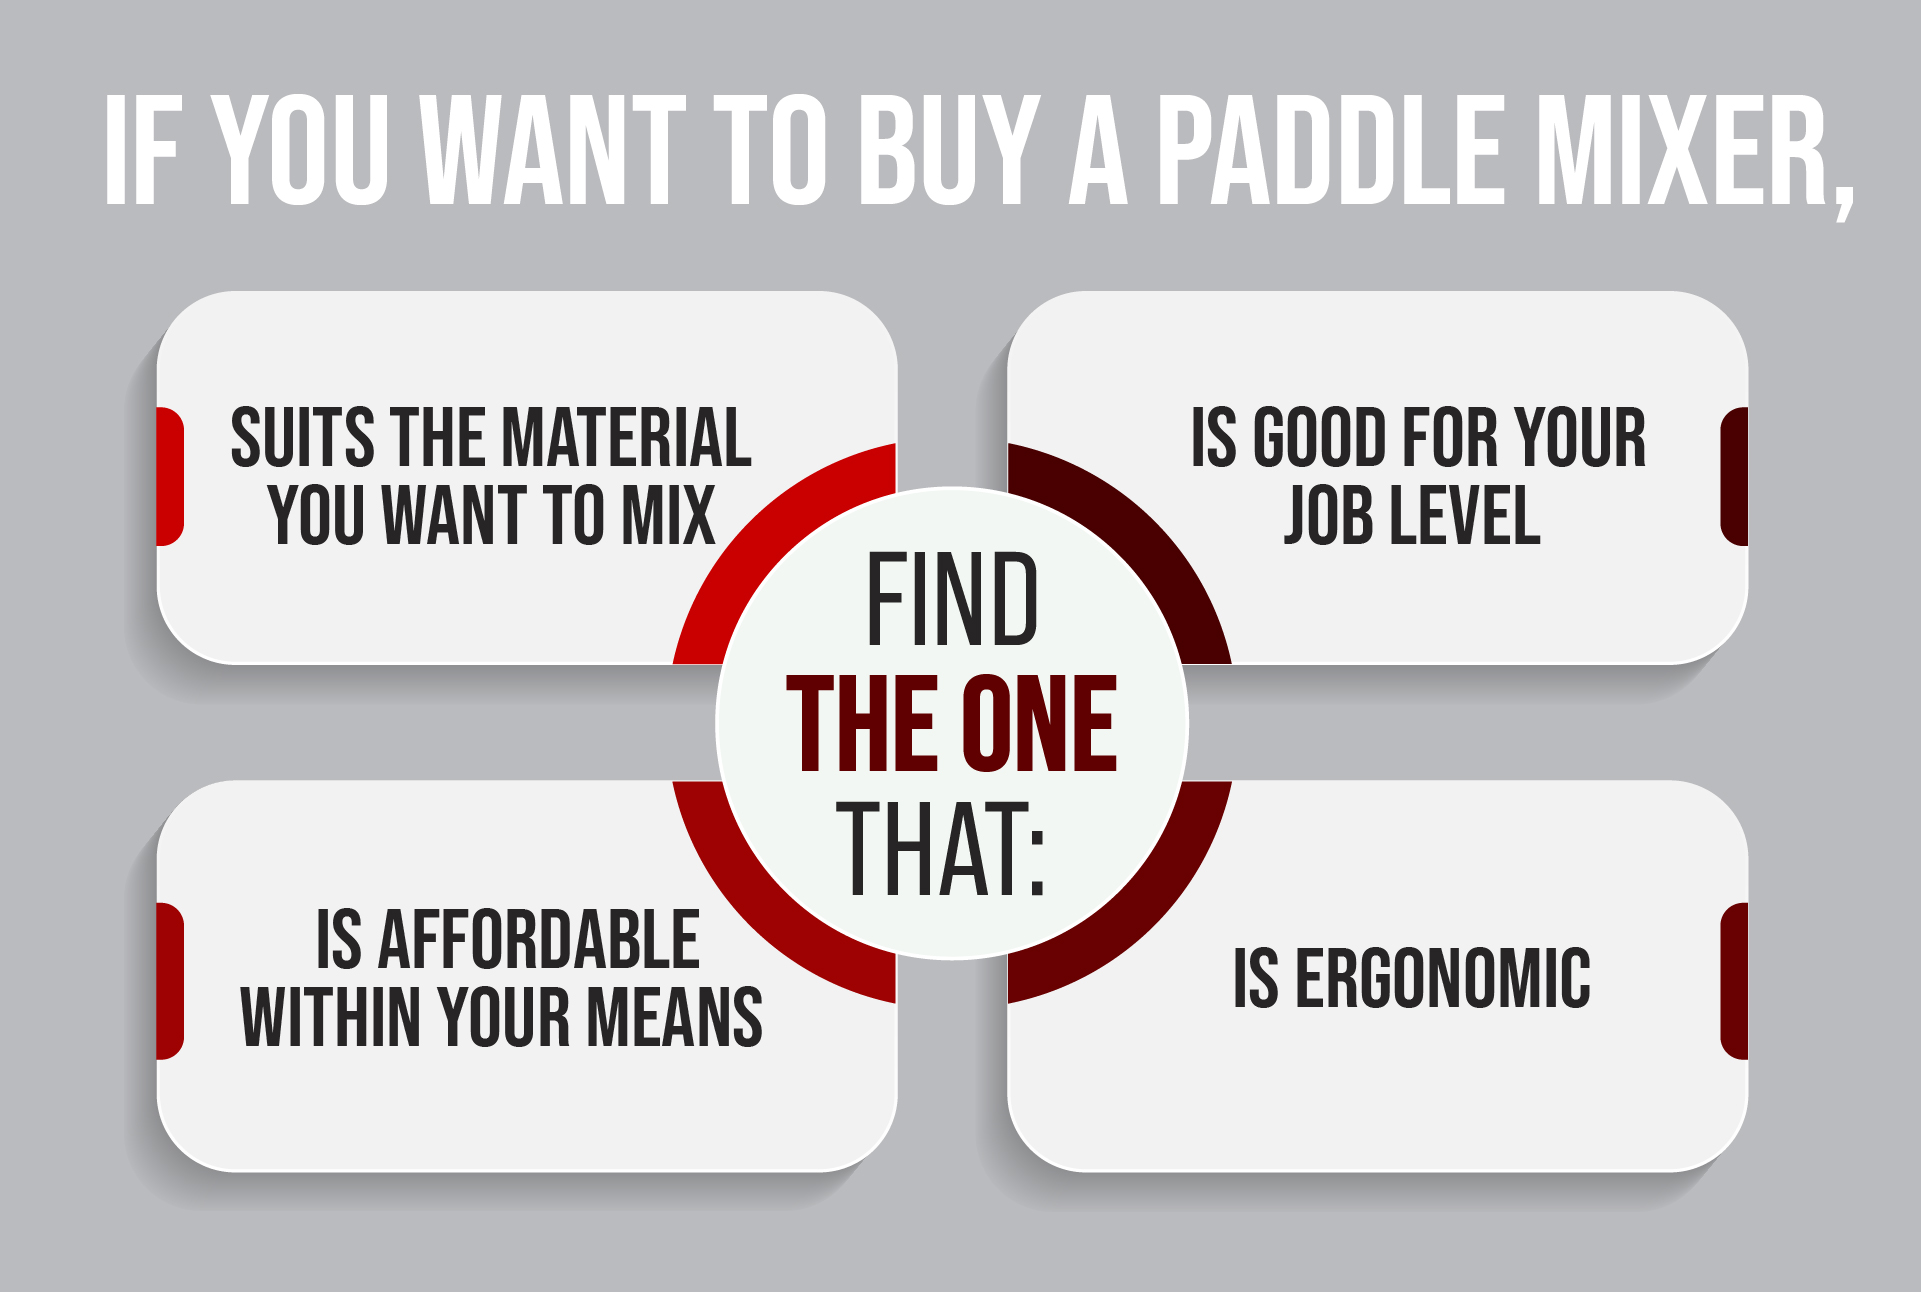 An Infographic on the best paddle mixer buying tips